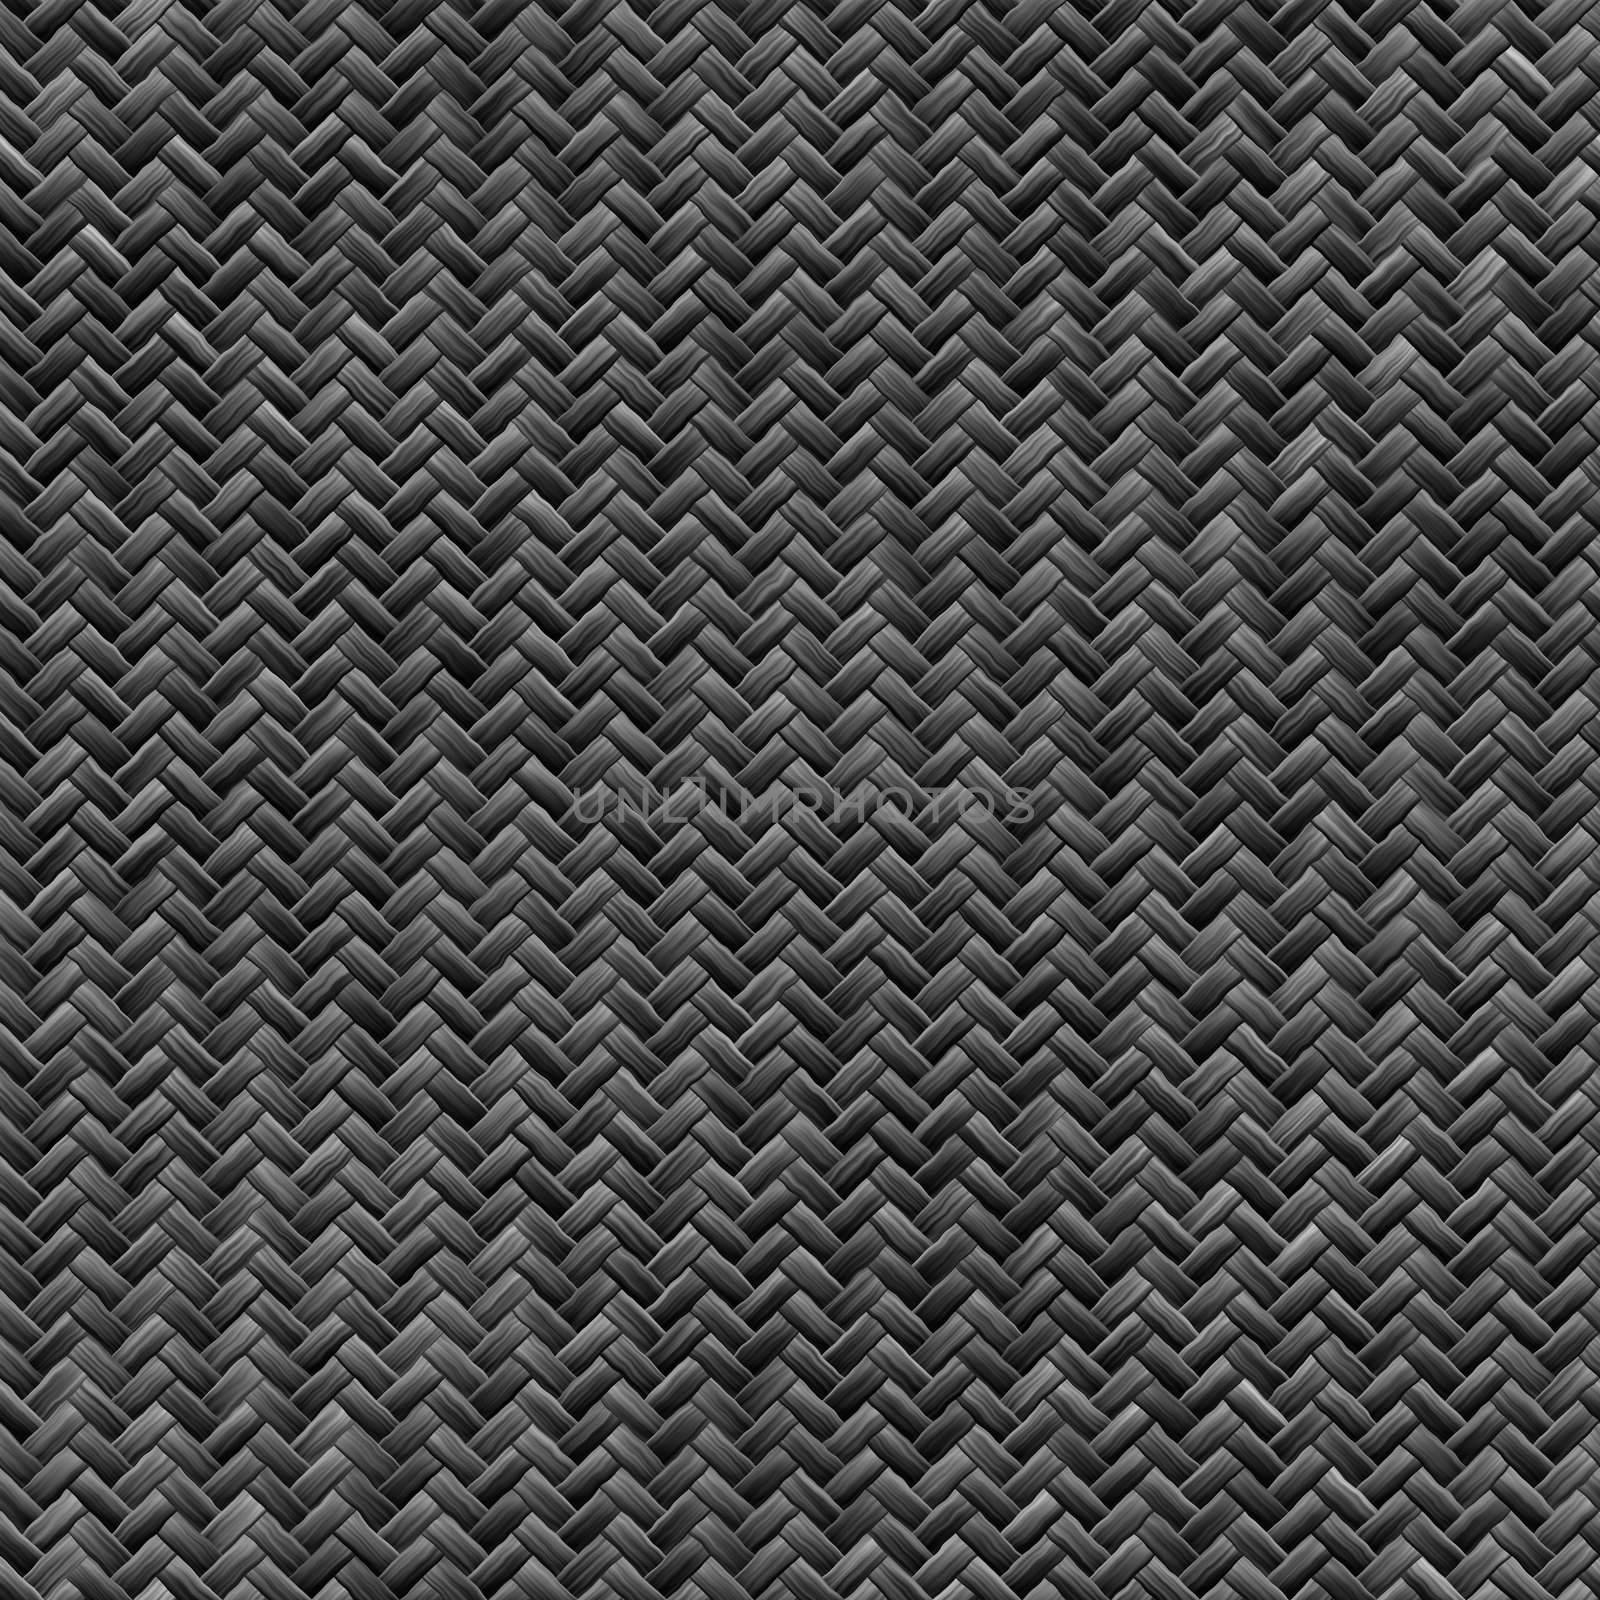 A tightly woven carbon fiber background texture - a great and highly-usable art element for that "high-tech" look you are going for in your print or web design piece.